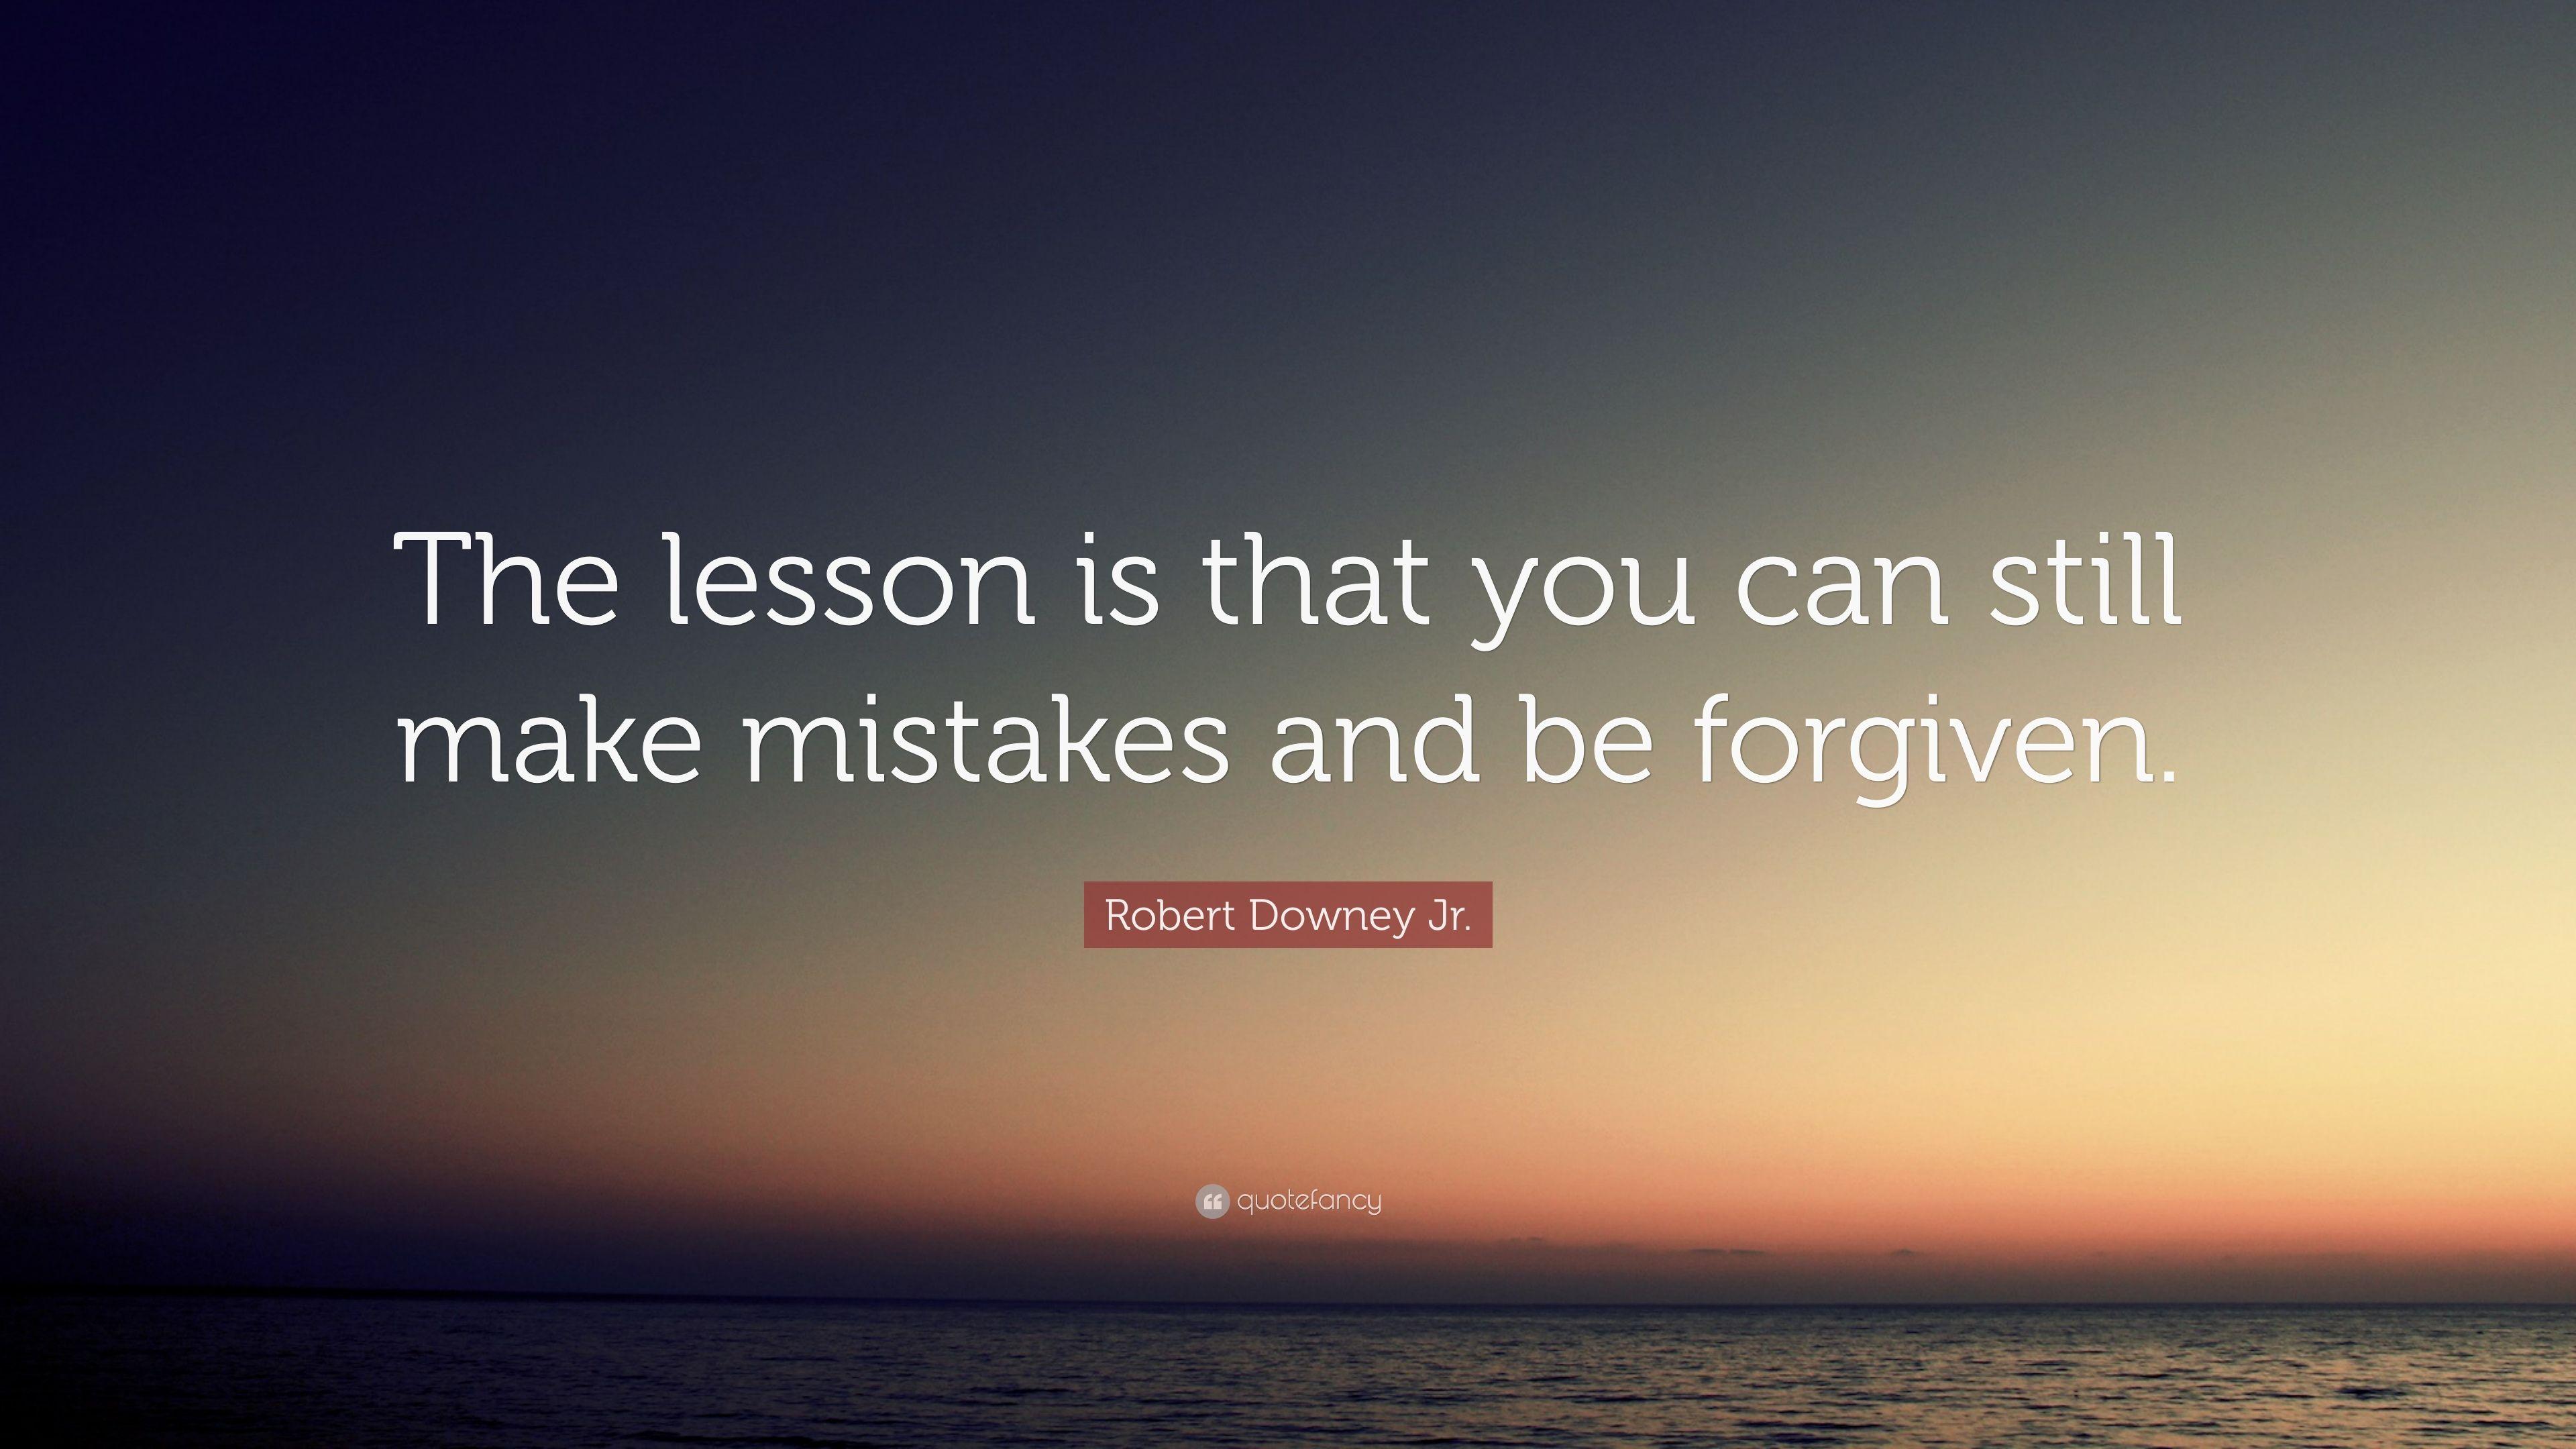 Robert Downey Jr. Quote: “The lesson is that you can still make